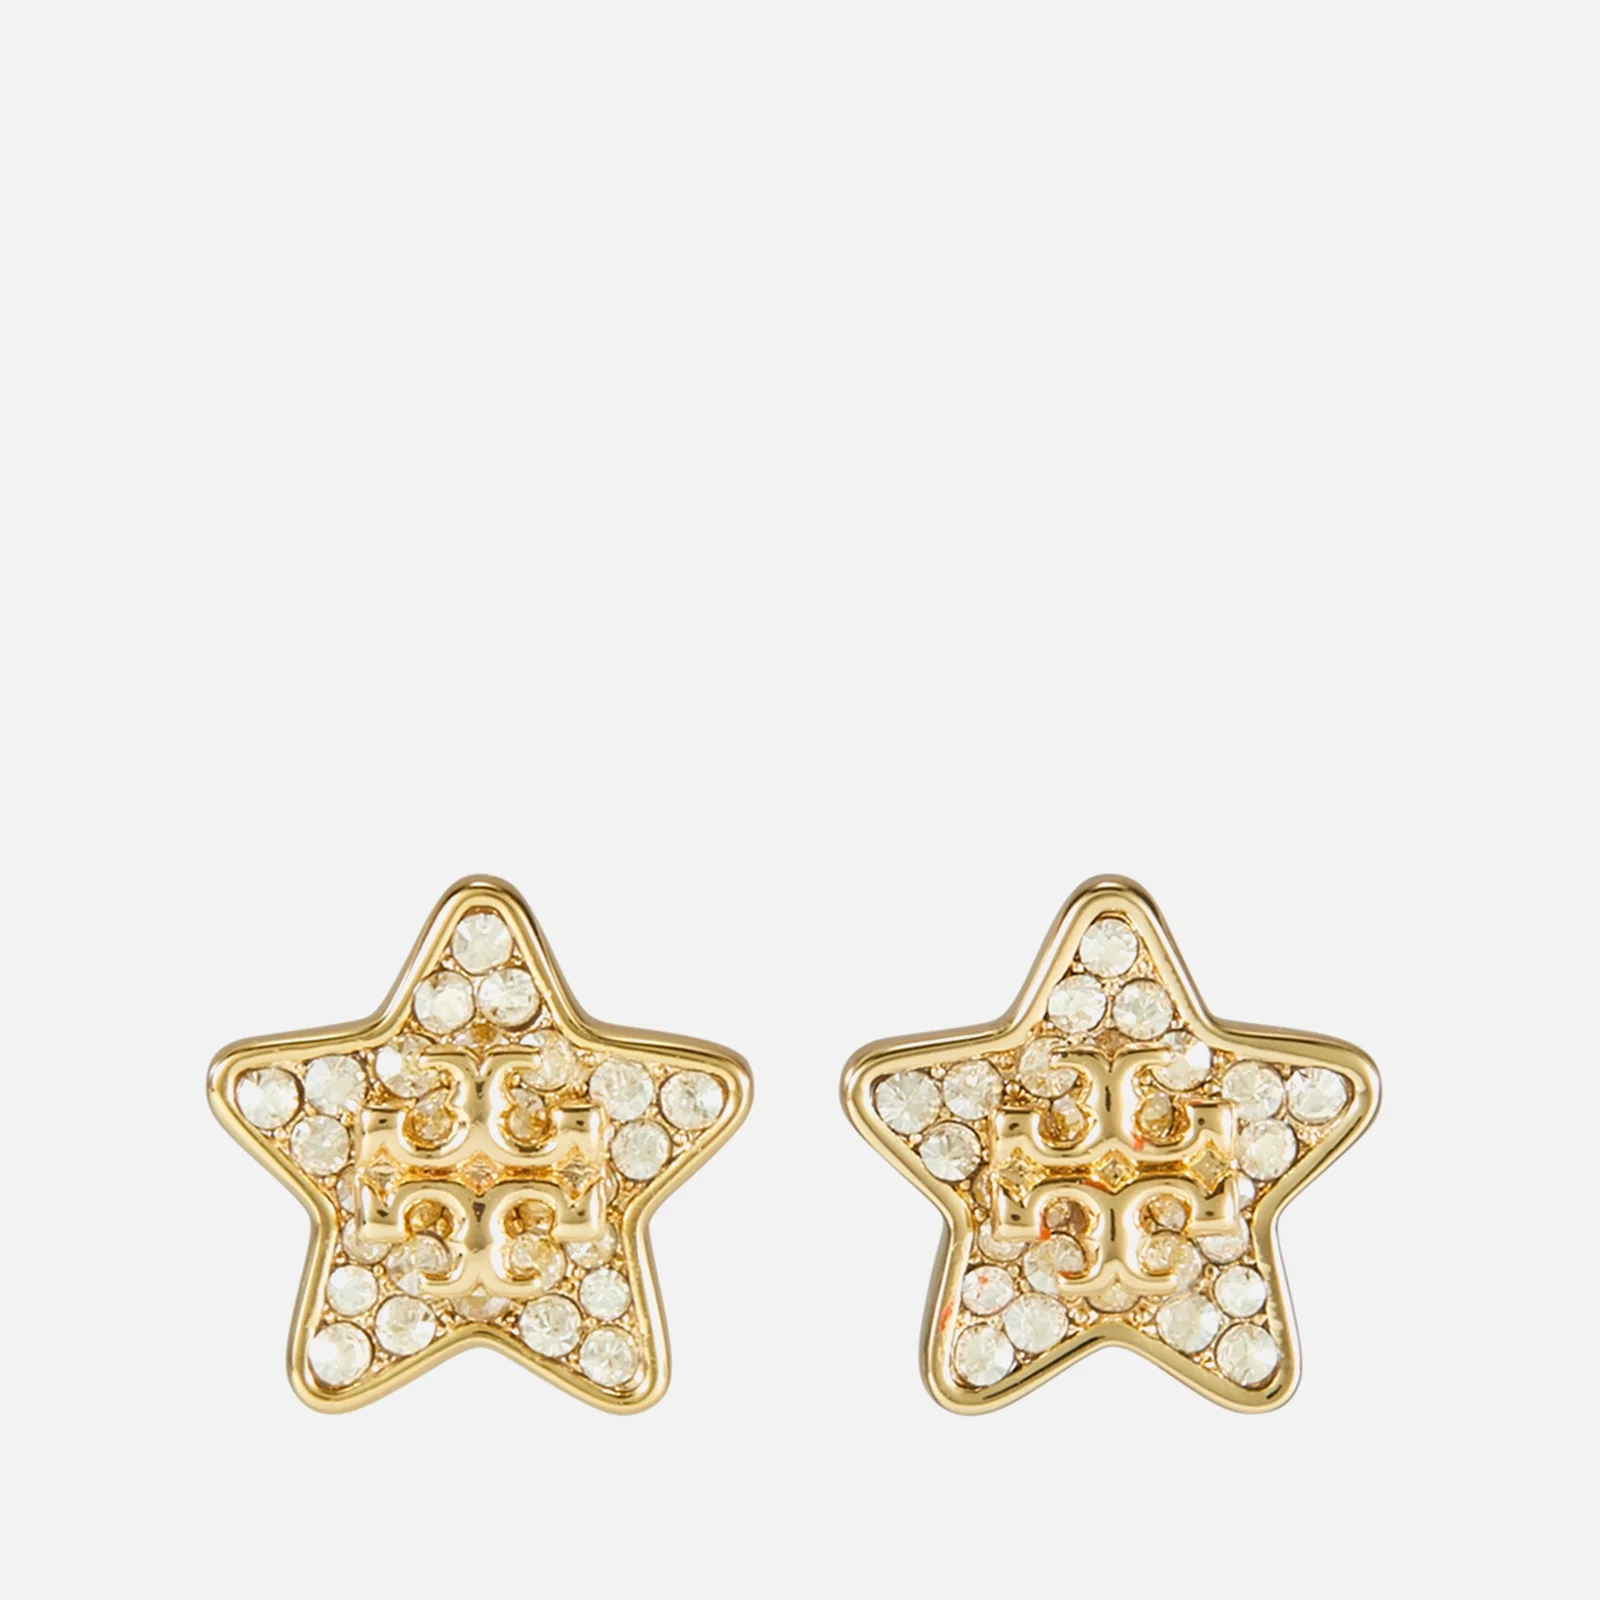 Tory Burch Kira Pave Star Gold-Plated Stud Earrings Image 1